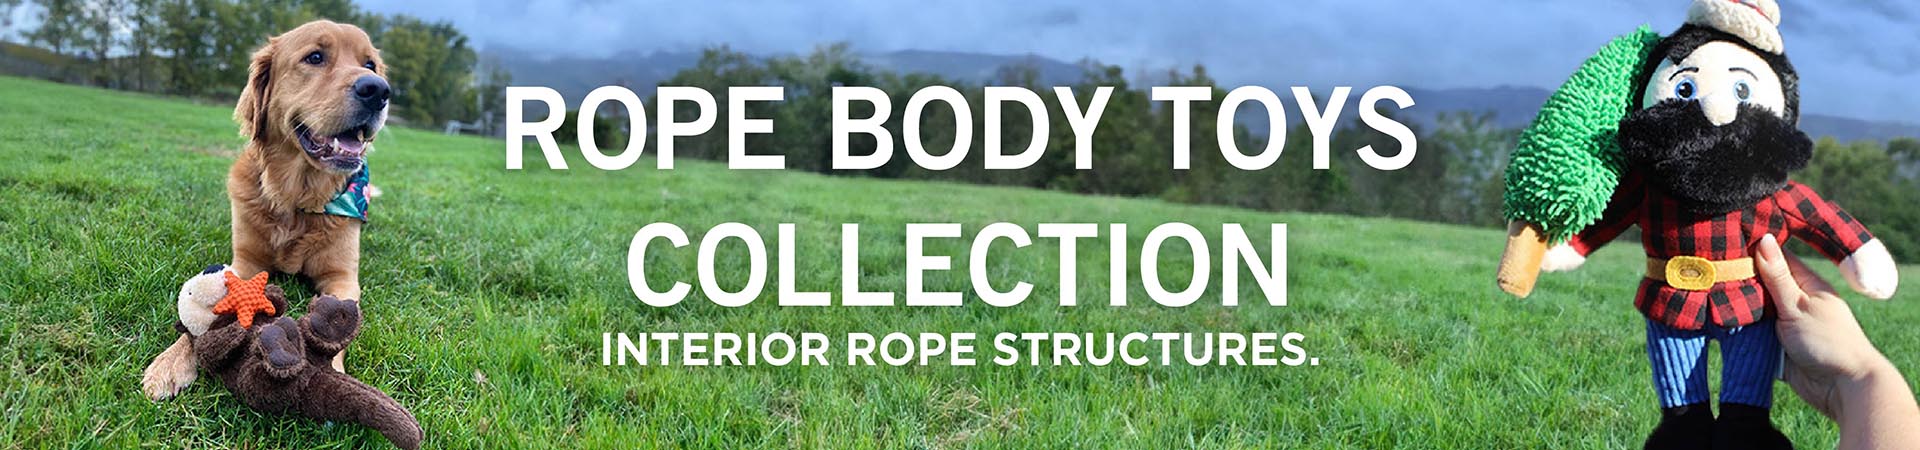 Rope Body Dog Toys Collection